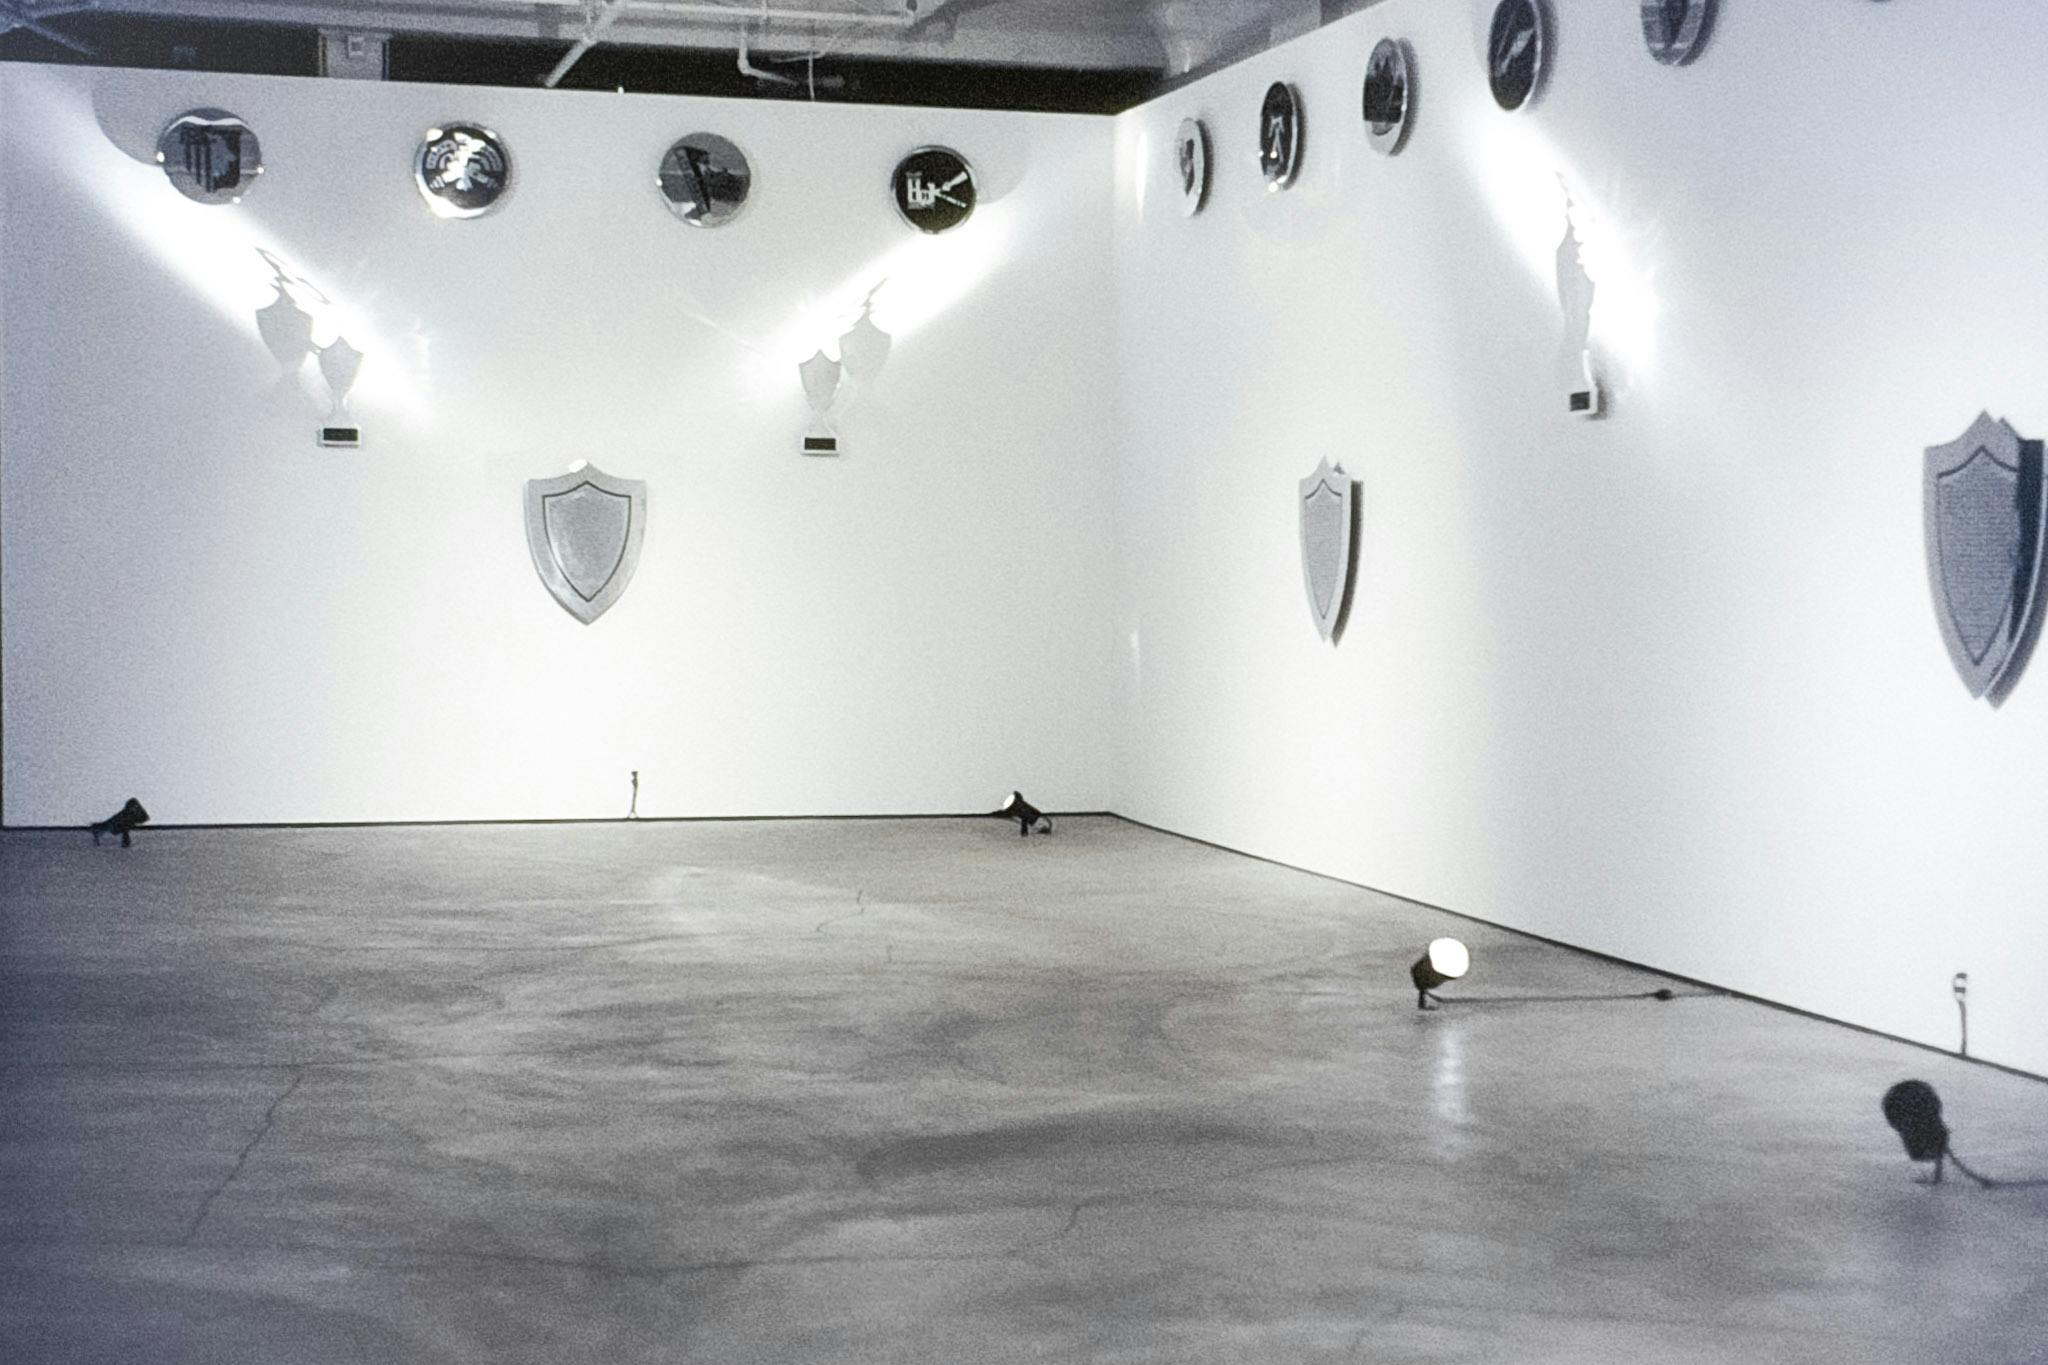 The corner of a gallery space with several metal artworks mounted on the walls. At the top there is a row of circular crests and below there are shield and trophy-like shapes. 